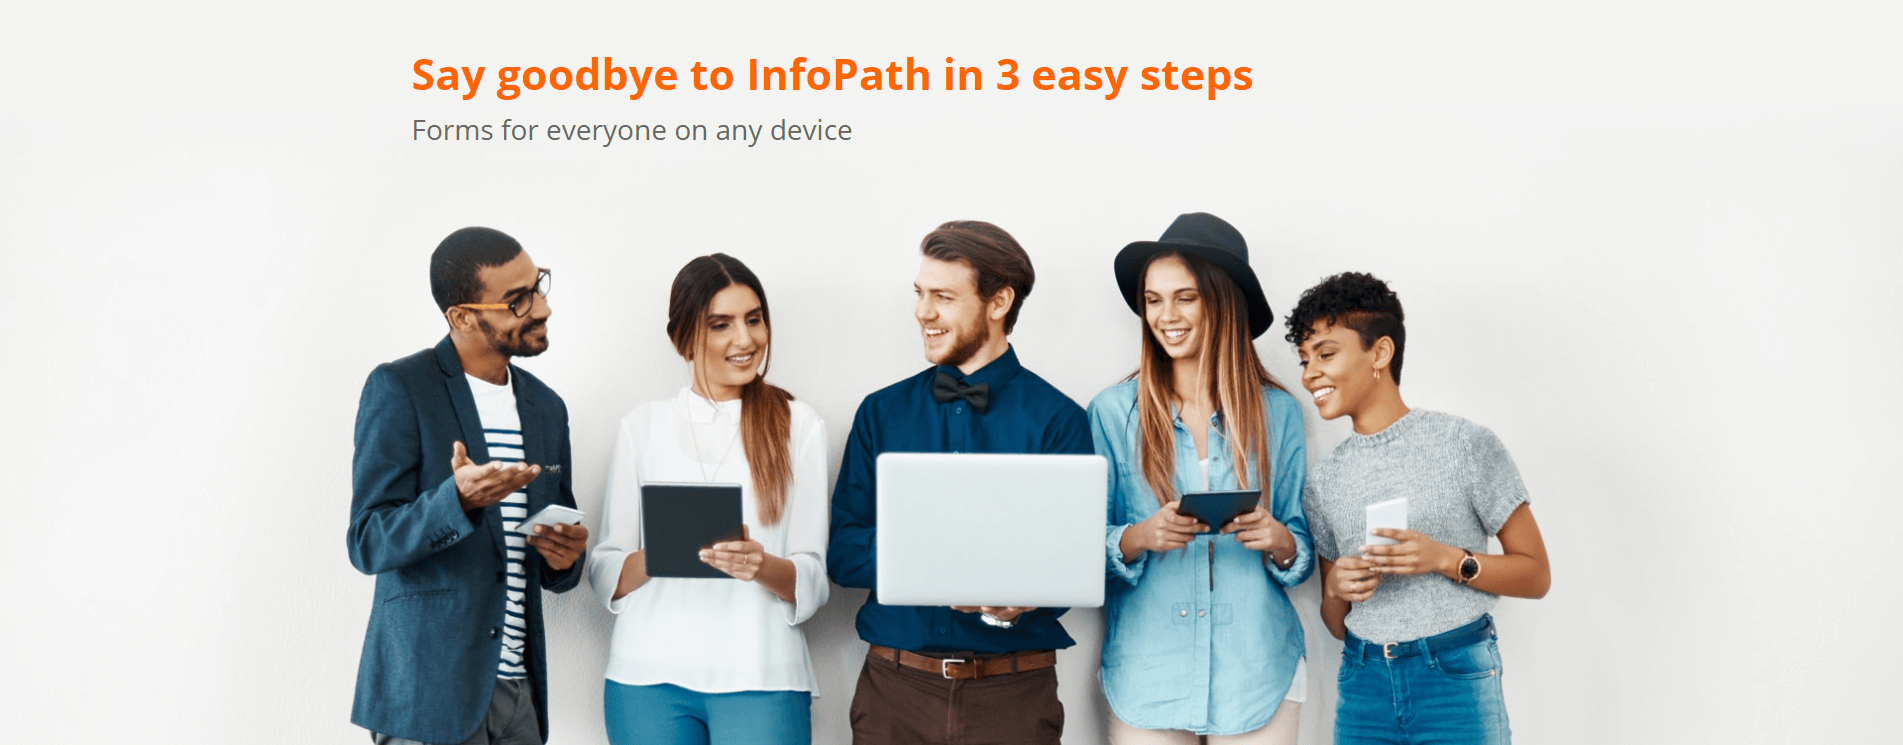 Say Goodbye To InfoPath in 3 Easy Steps